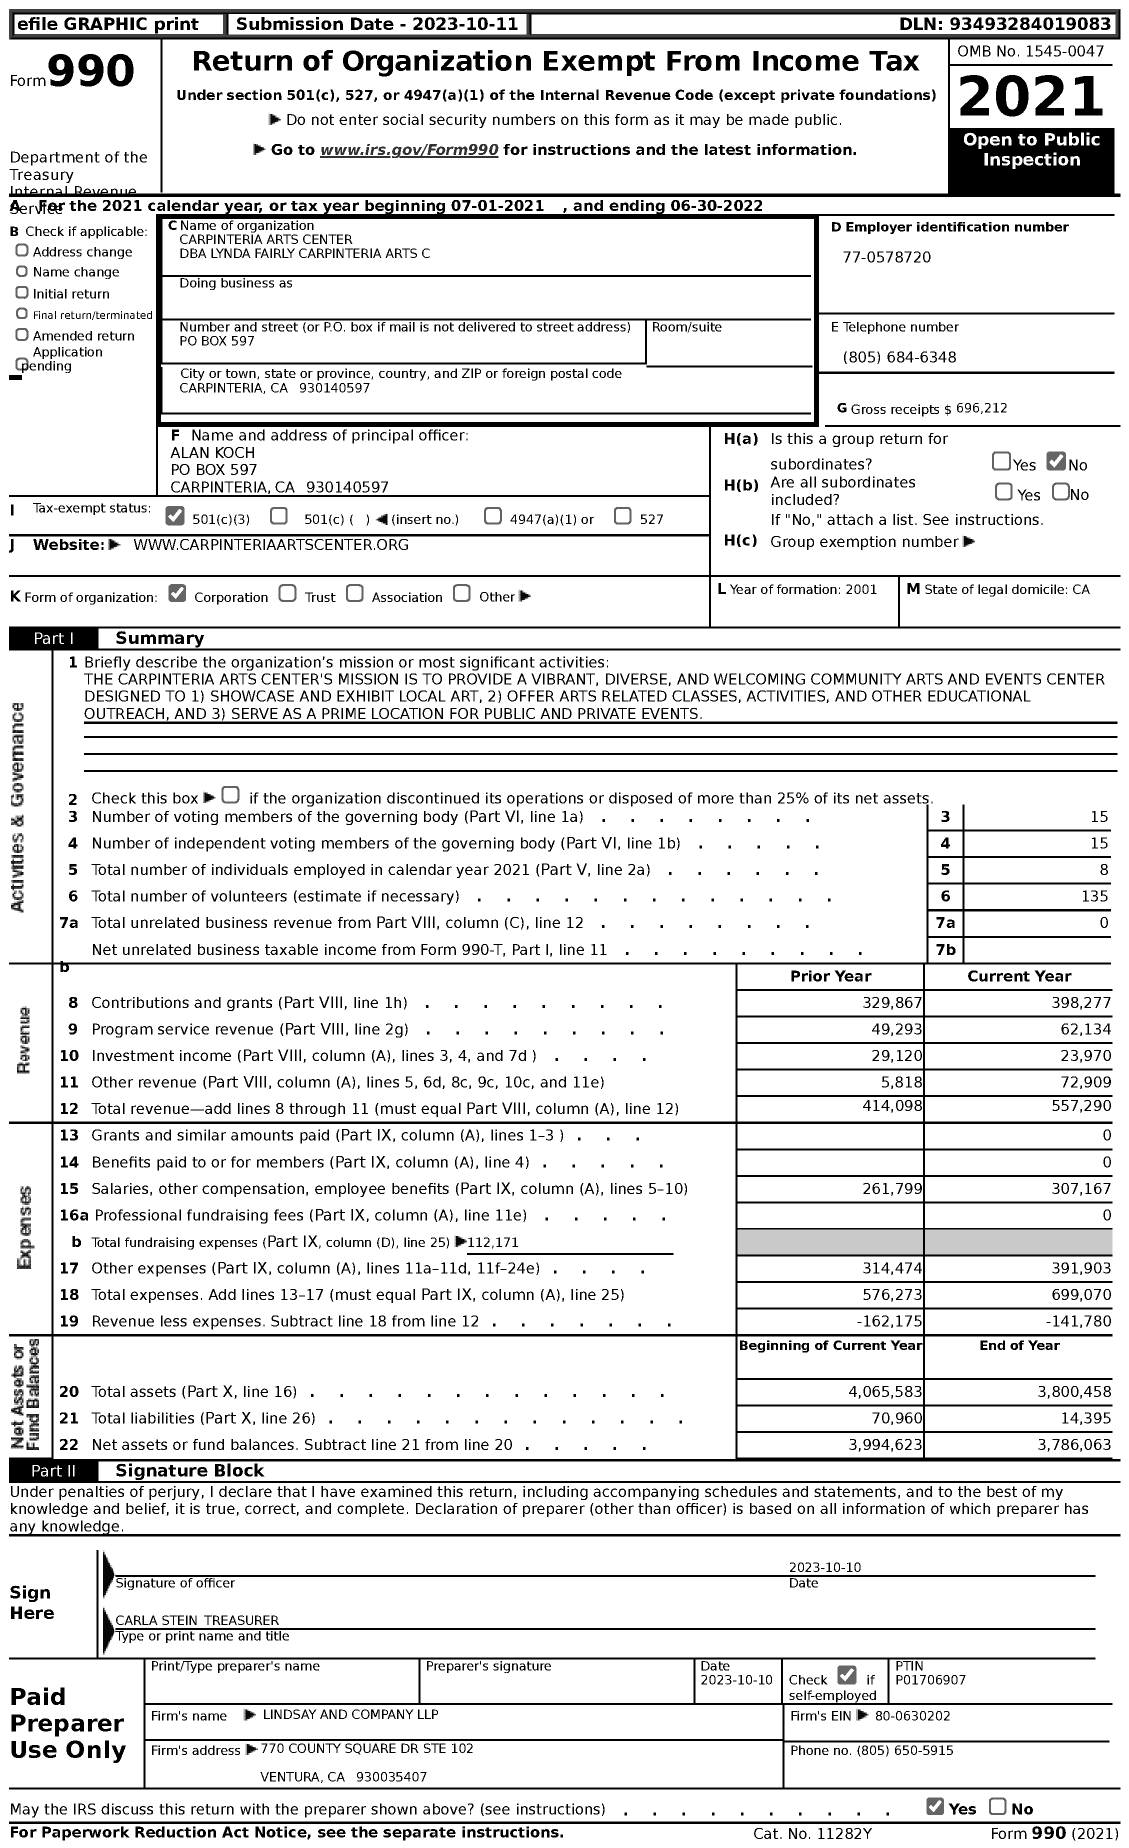 Image of first page of 2021 Form 990 for Lynda Fairly Carpinteria Arts Council